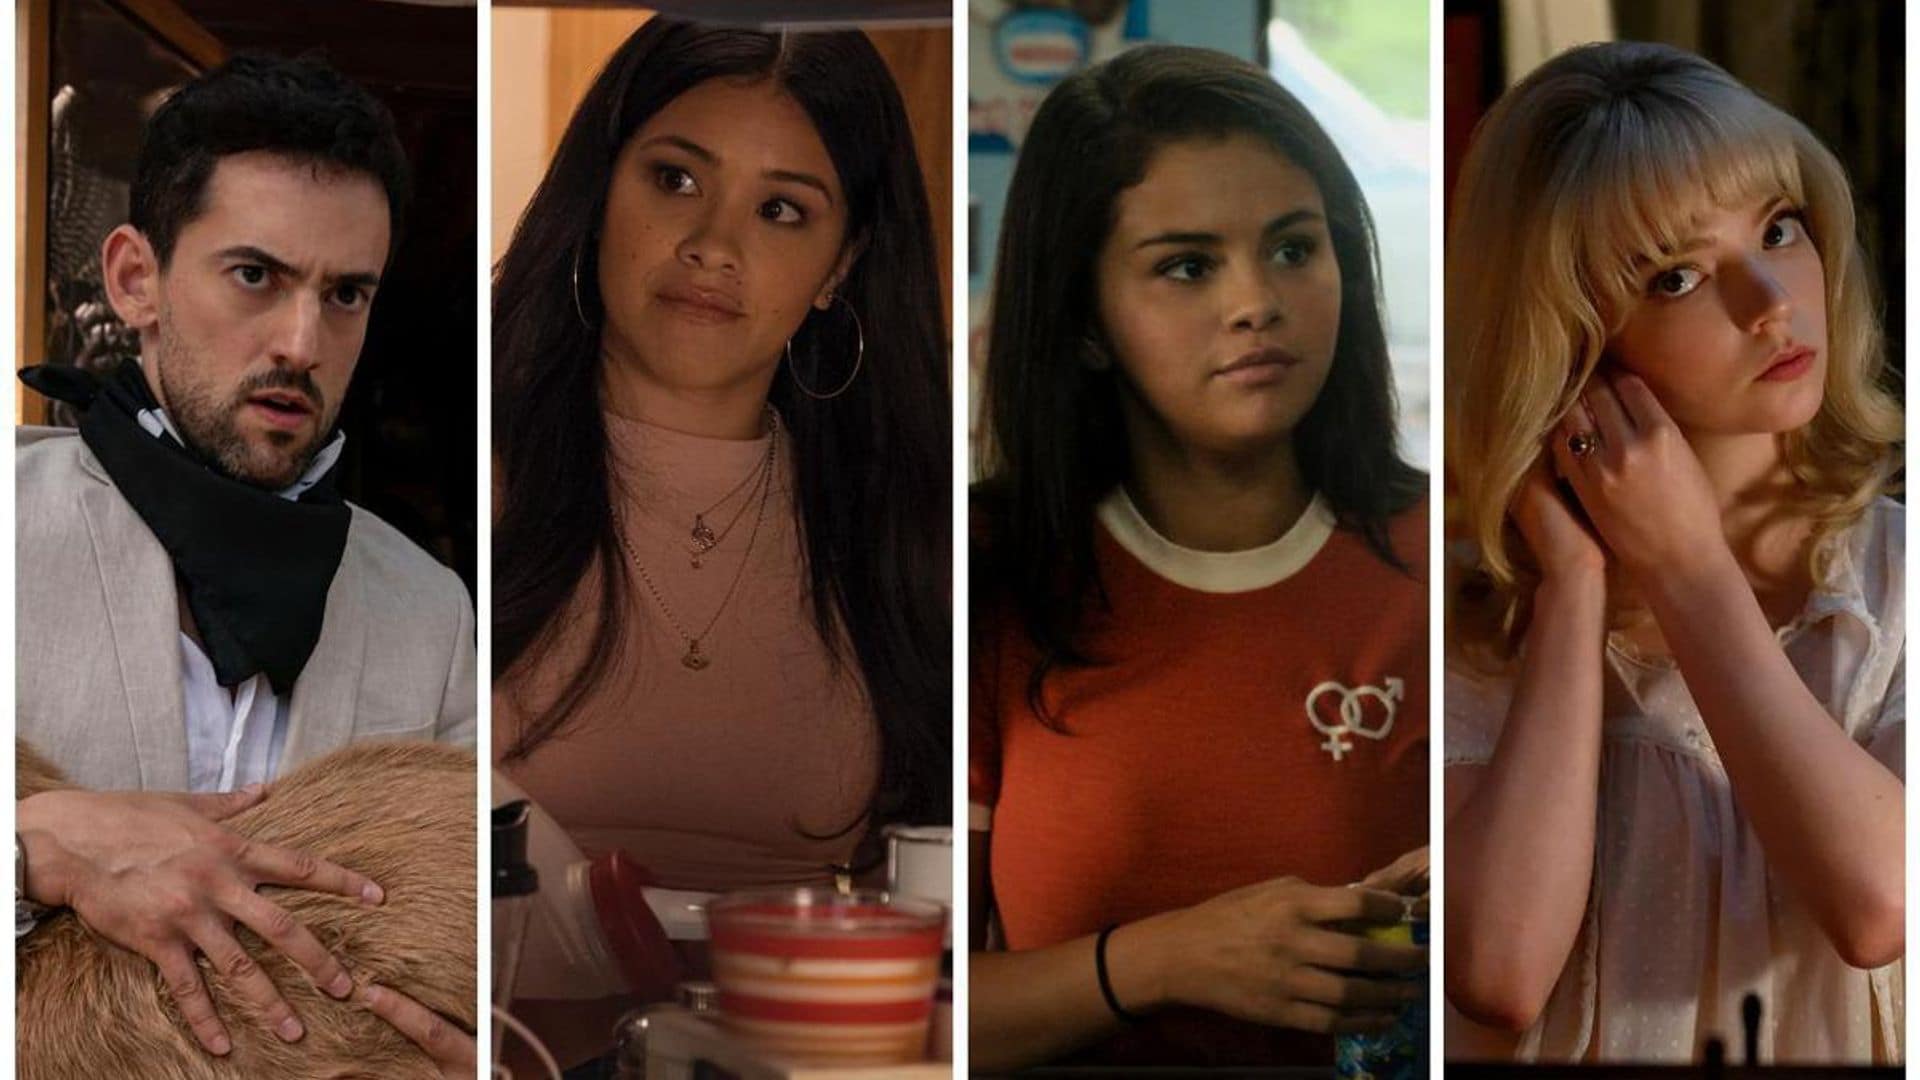 Focus Features 20th Anniversary: 8 movies starring Latino talent you might want to watch